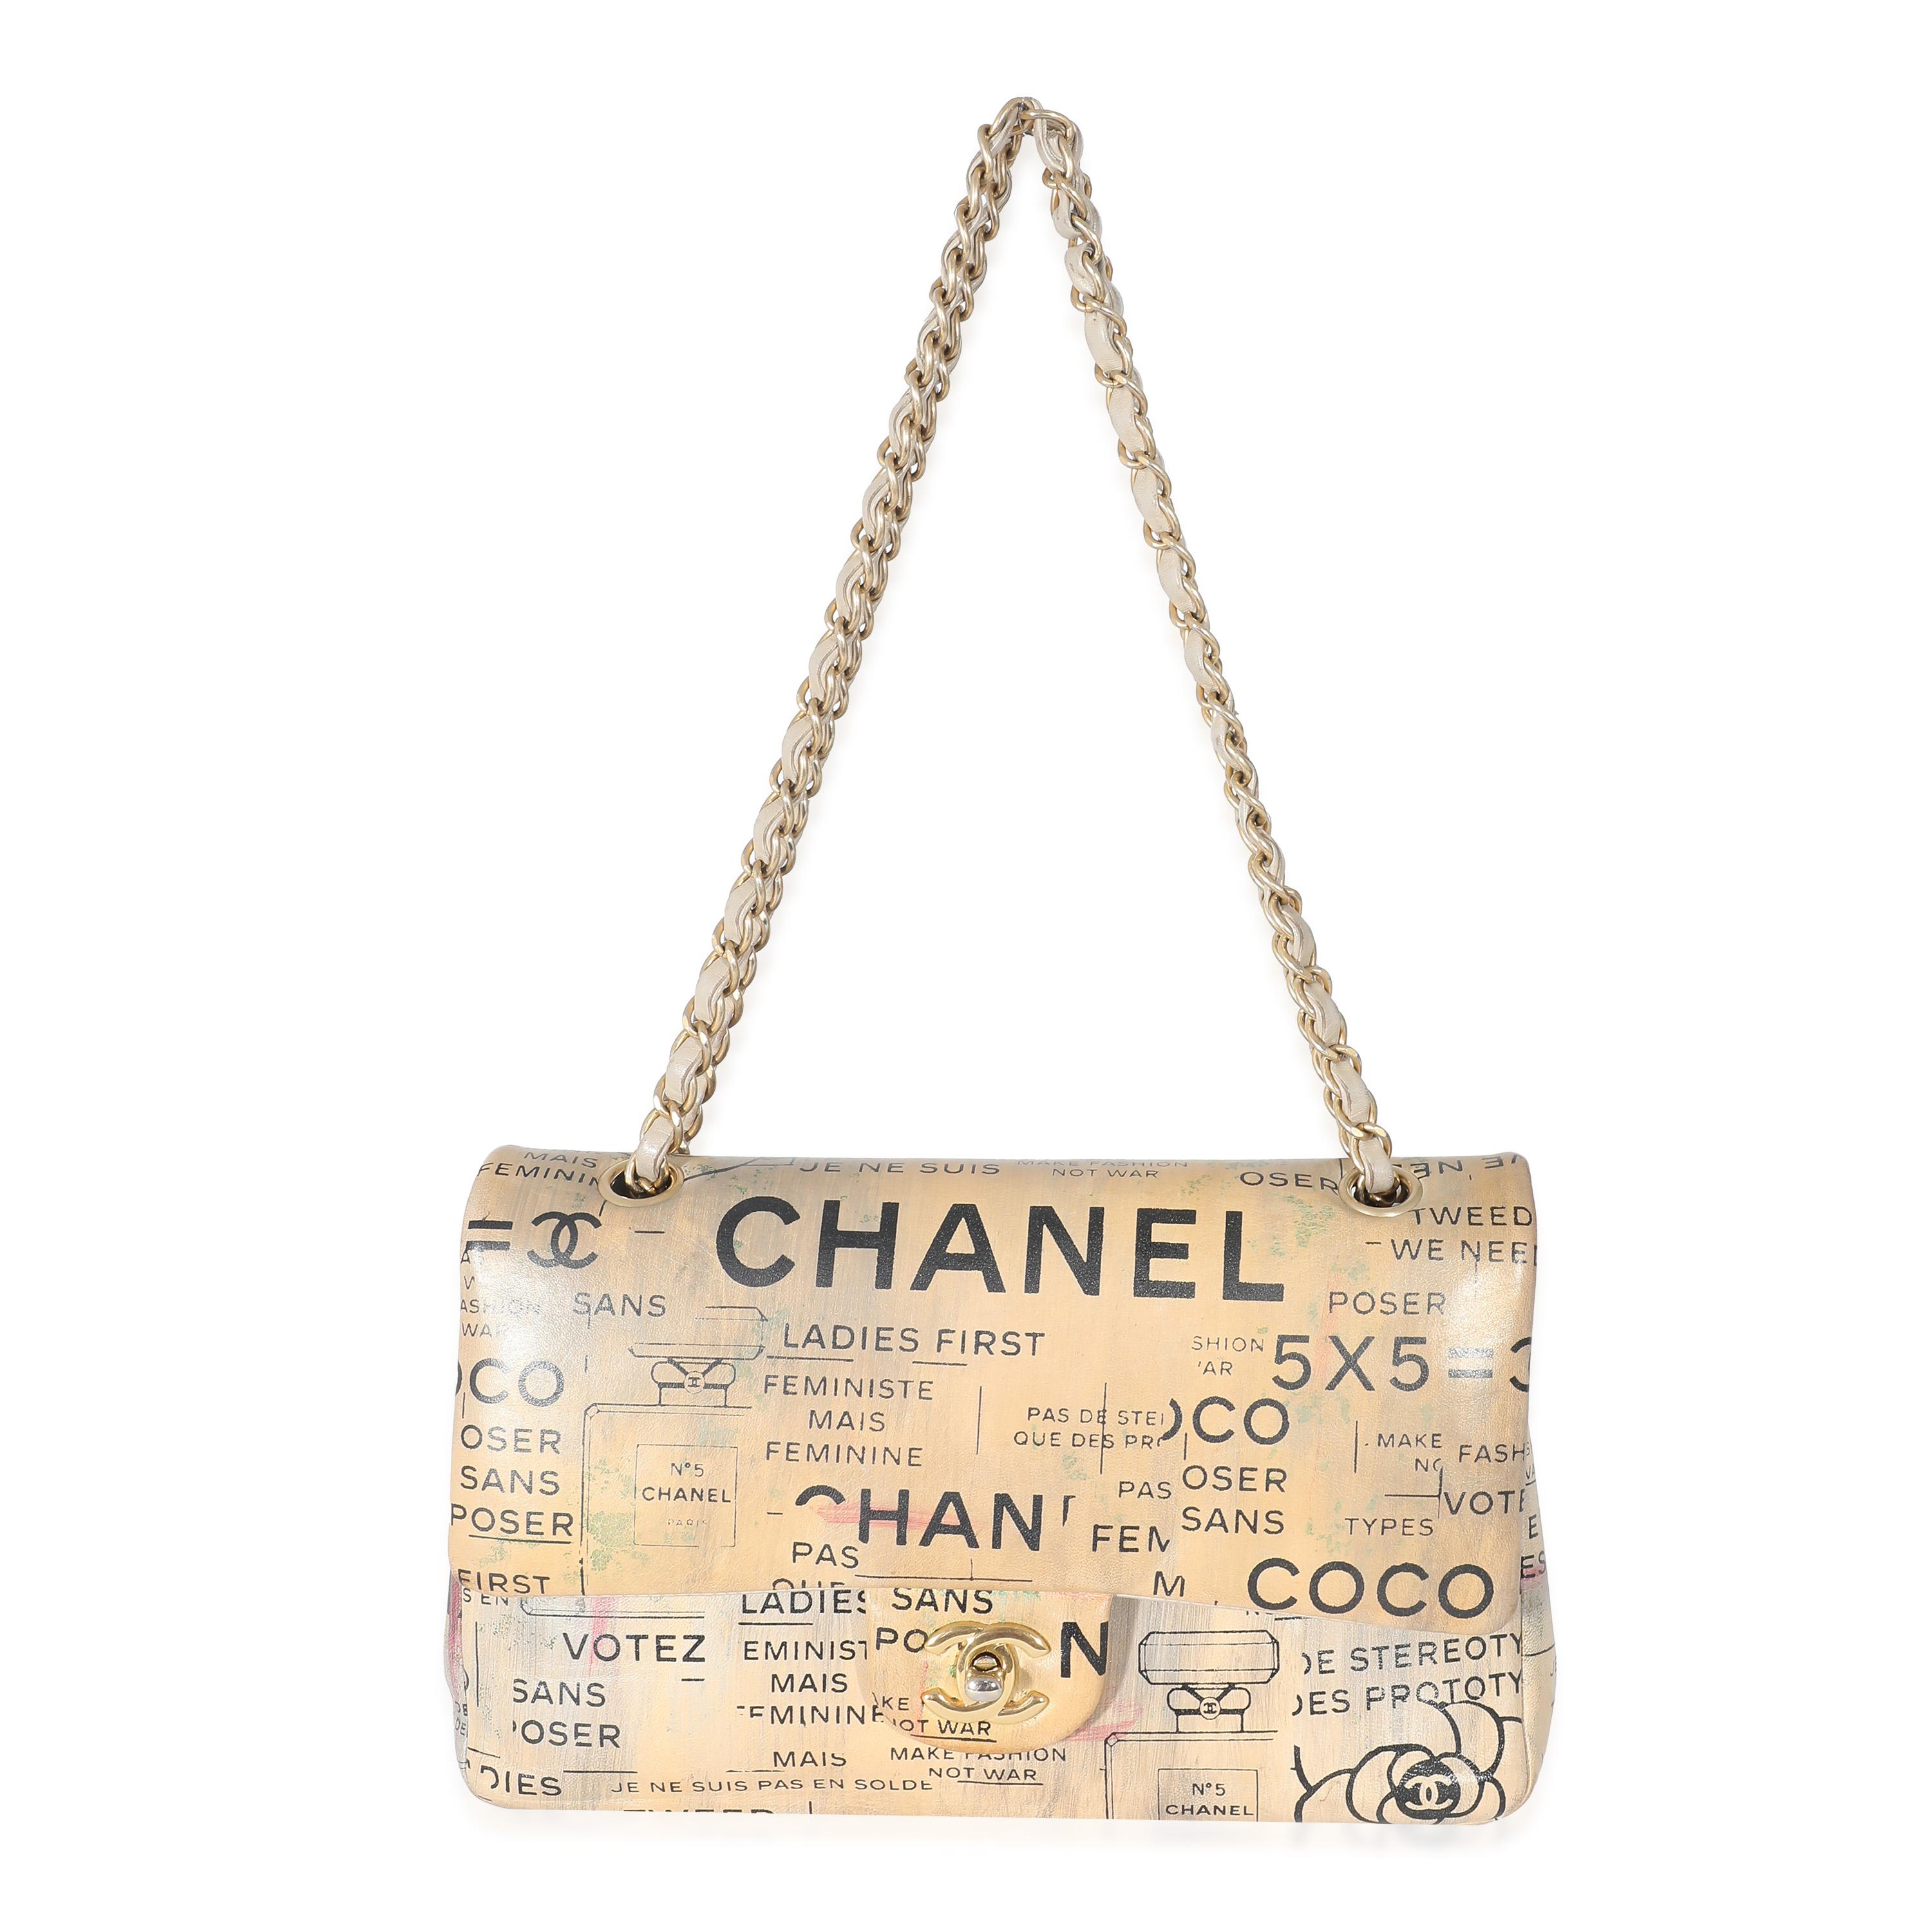 Listing Title: Chanel Limited Edition Graffiti Newspaper Print Medium Double Flap Bag
SKU: 132953
Condition: Pre-owned 
Handbag Condition: Good
Condition Comments: Item is in good condition with apparent signs of wear. Discoloration, marks, and